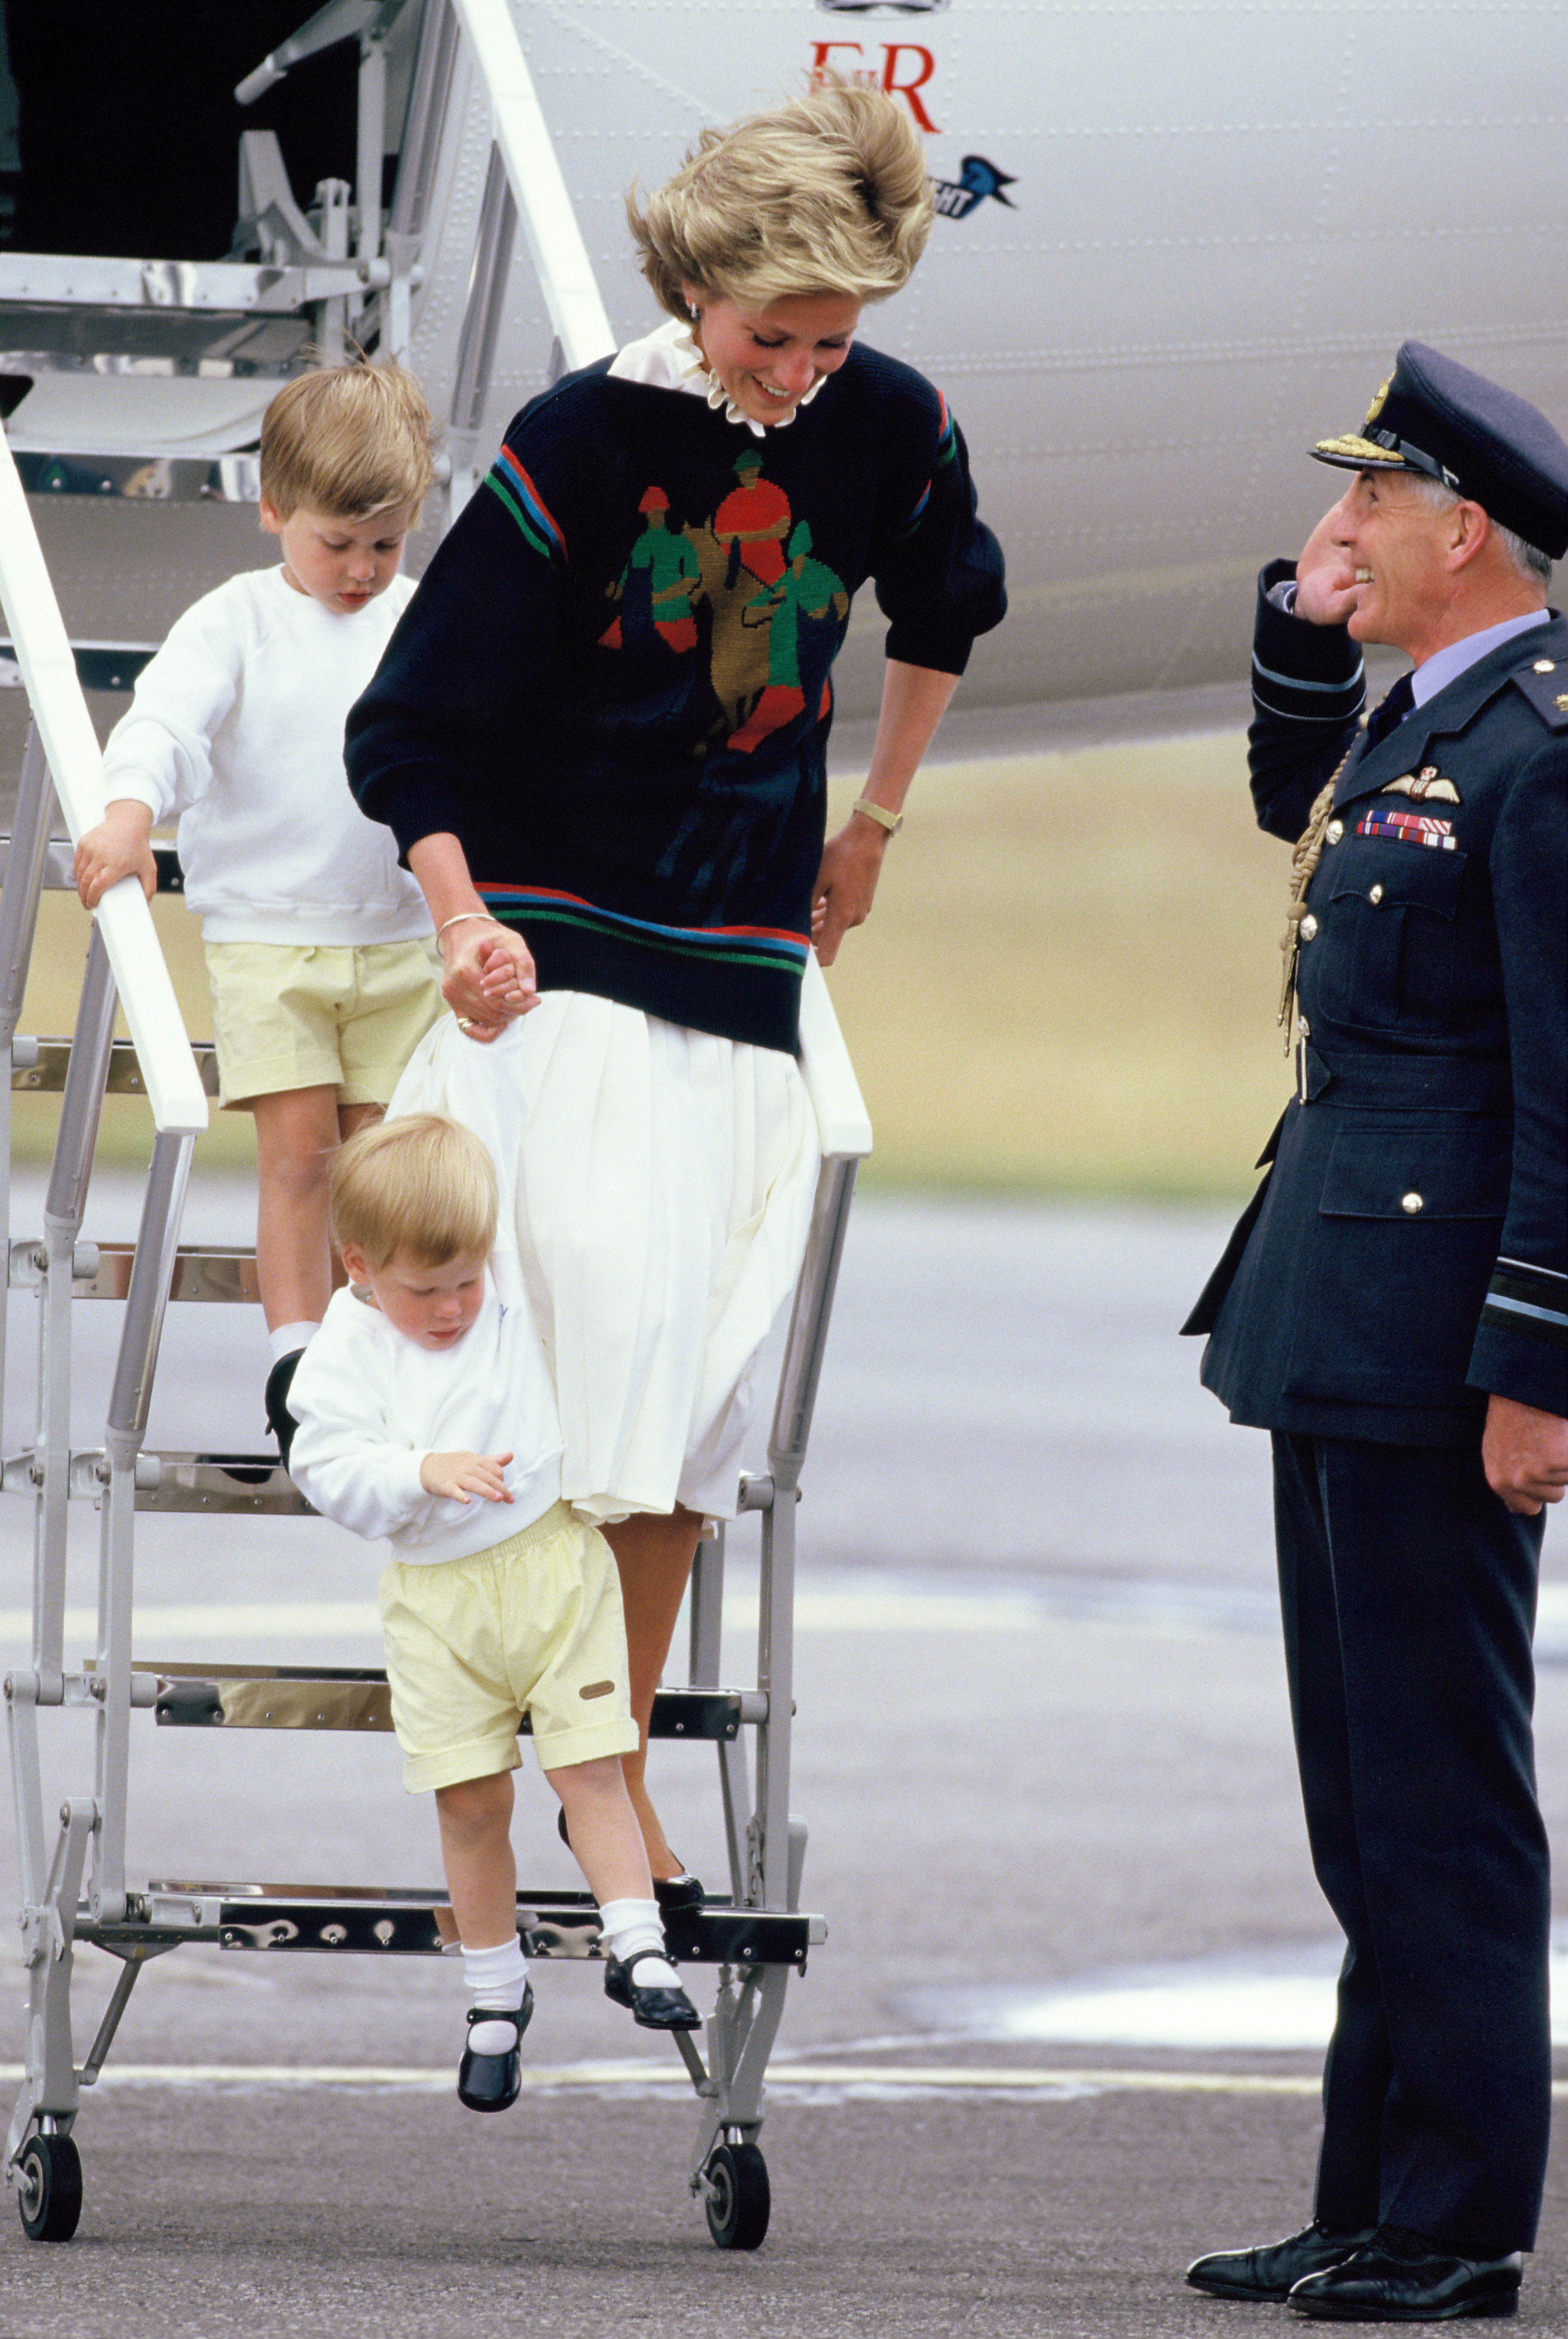 <p>Princess Diana and young sons <a href="https://www.wonderwall.com/celebrity/profiles/overview/prince-william-482.article">Prince William</a> and <a href="https://www.wonderwall.com/celebrity/profiles/overview/prince-harry-481.article">Prince Harry</a> arrived at Aberdeen Airport in Scotland on Aug. 15, 1986, to start their summer holidays with the queen.</p>